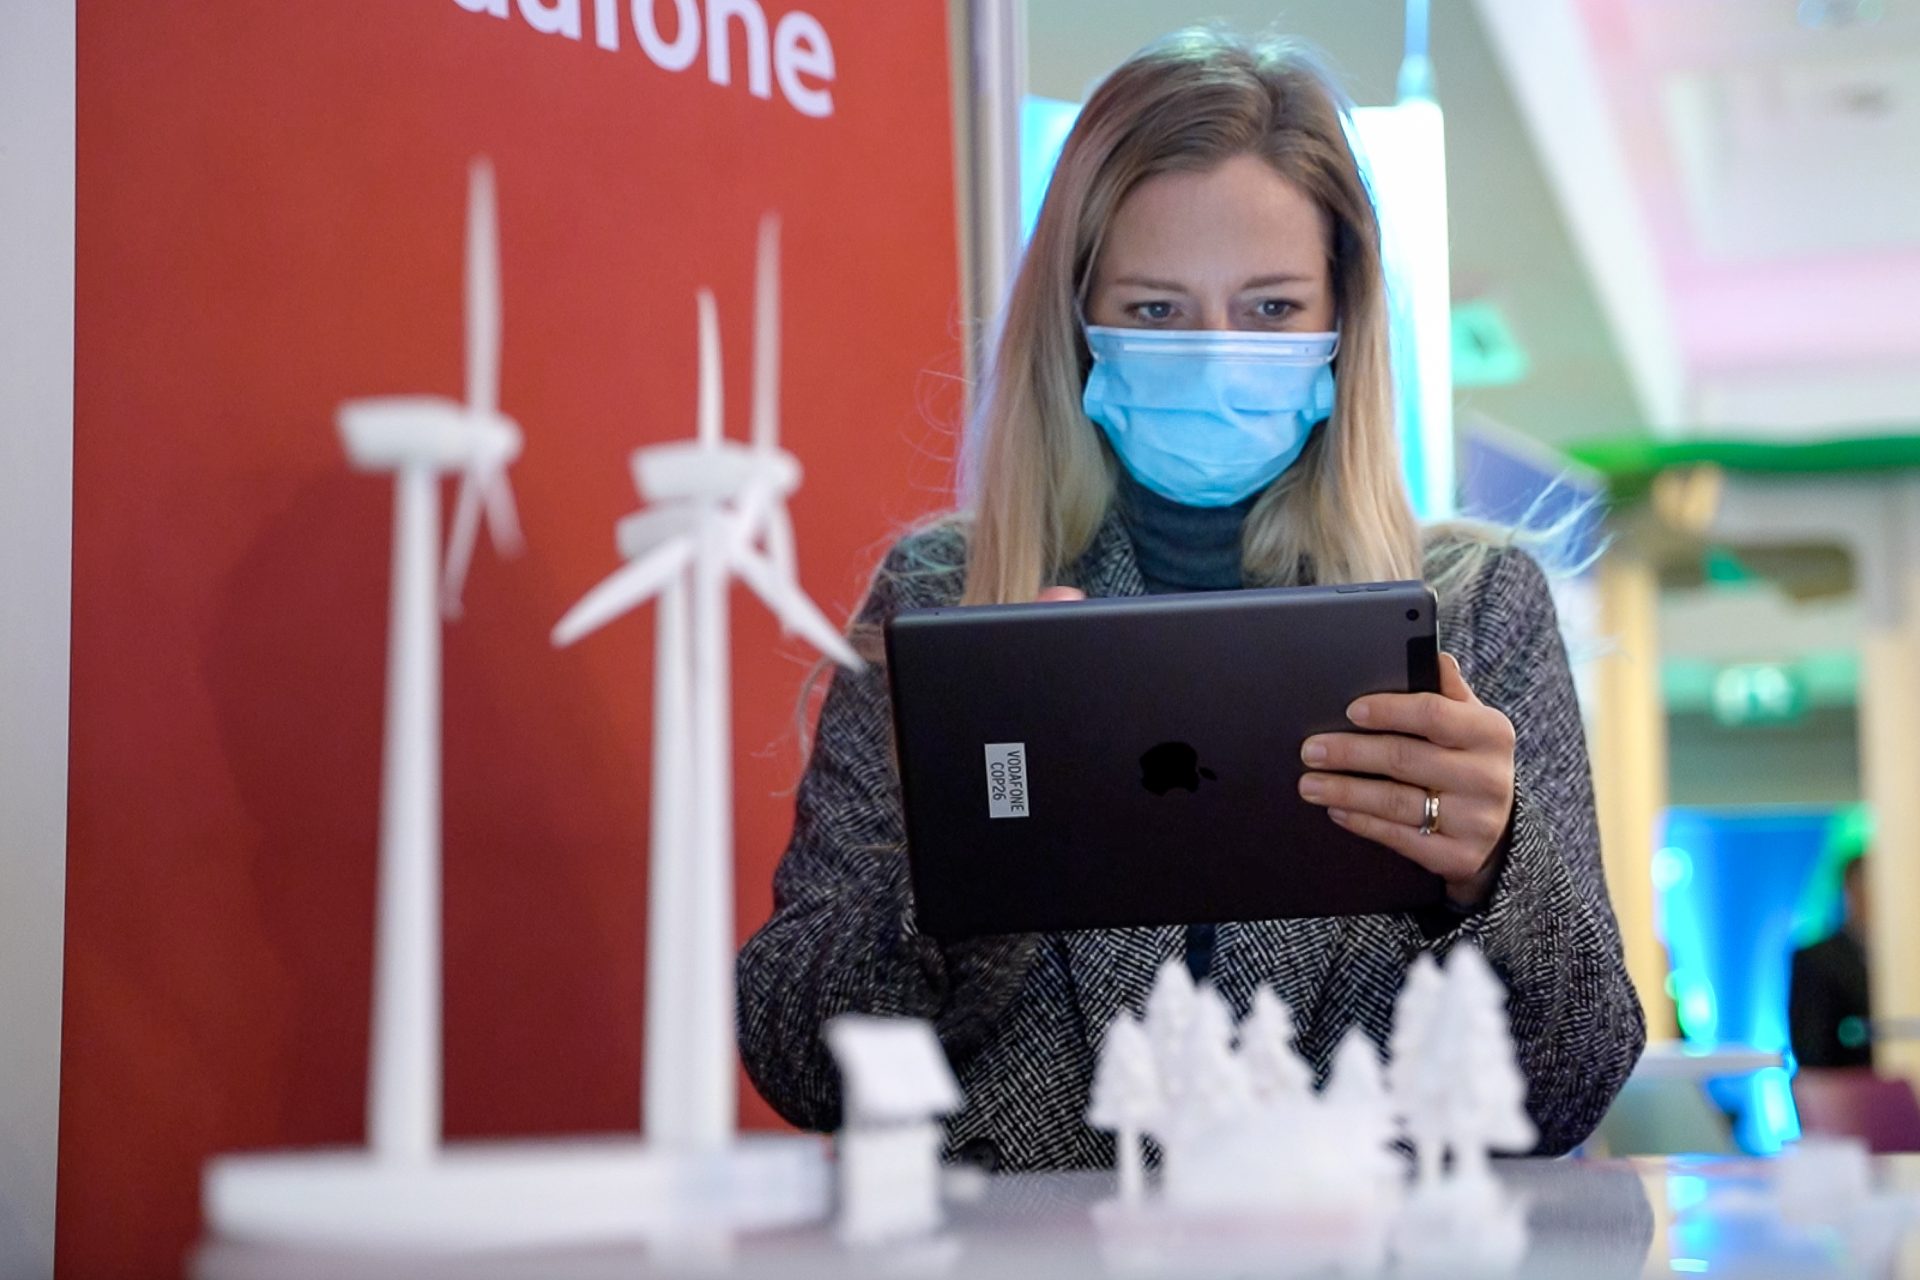 Vodafone's AR experience at COP26 E-Alliance & Partners